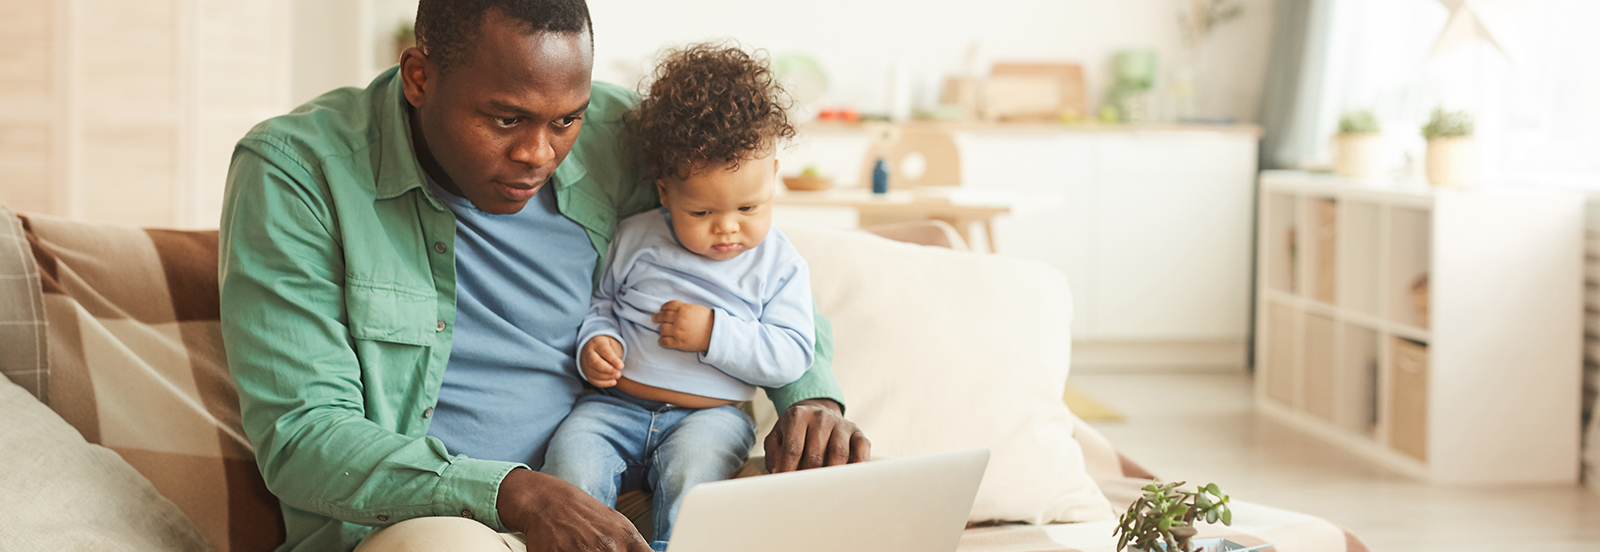 Father and child looking at laptop